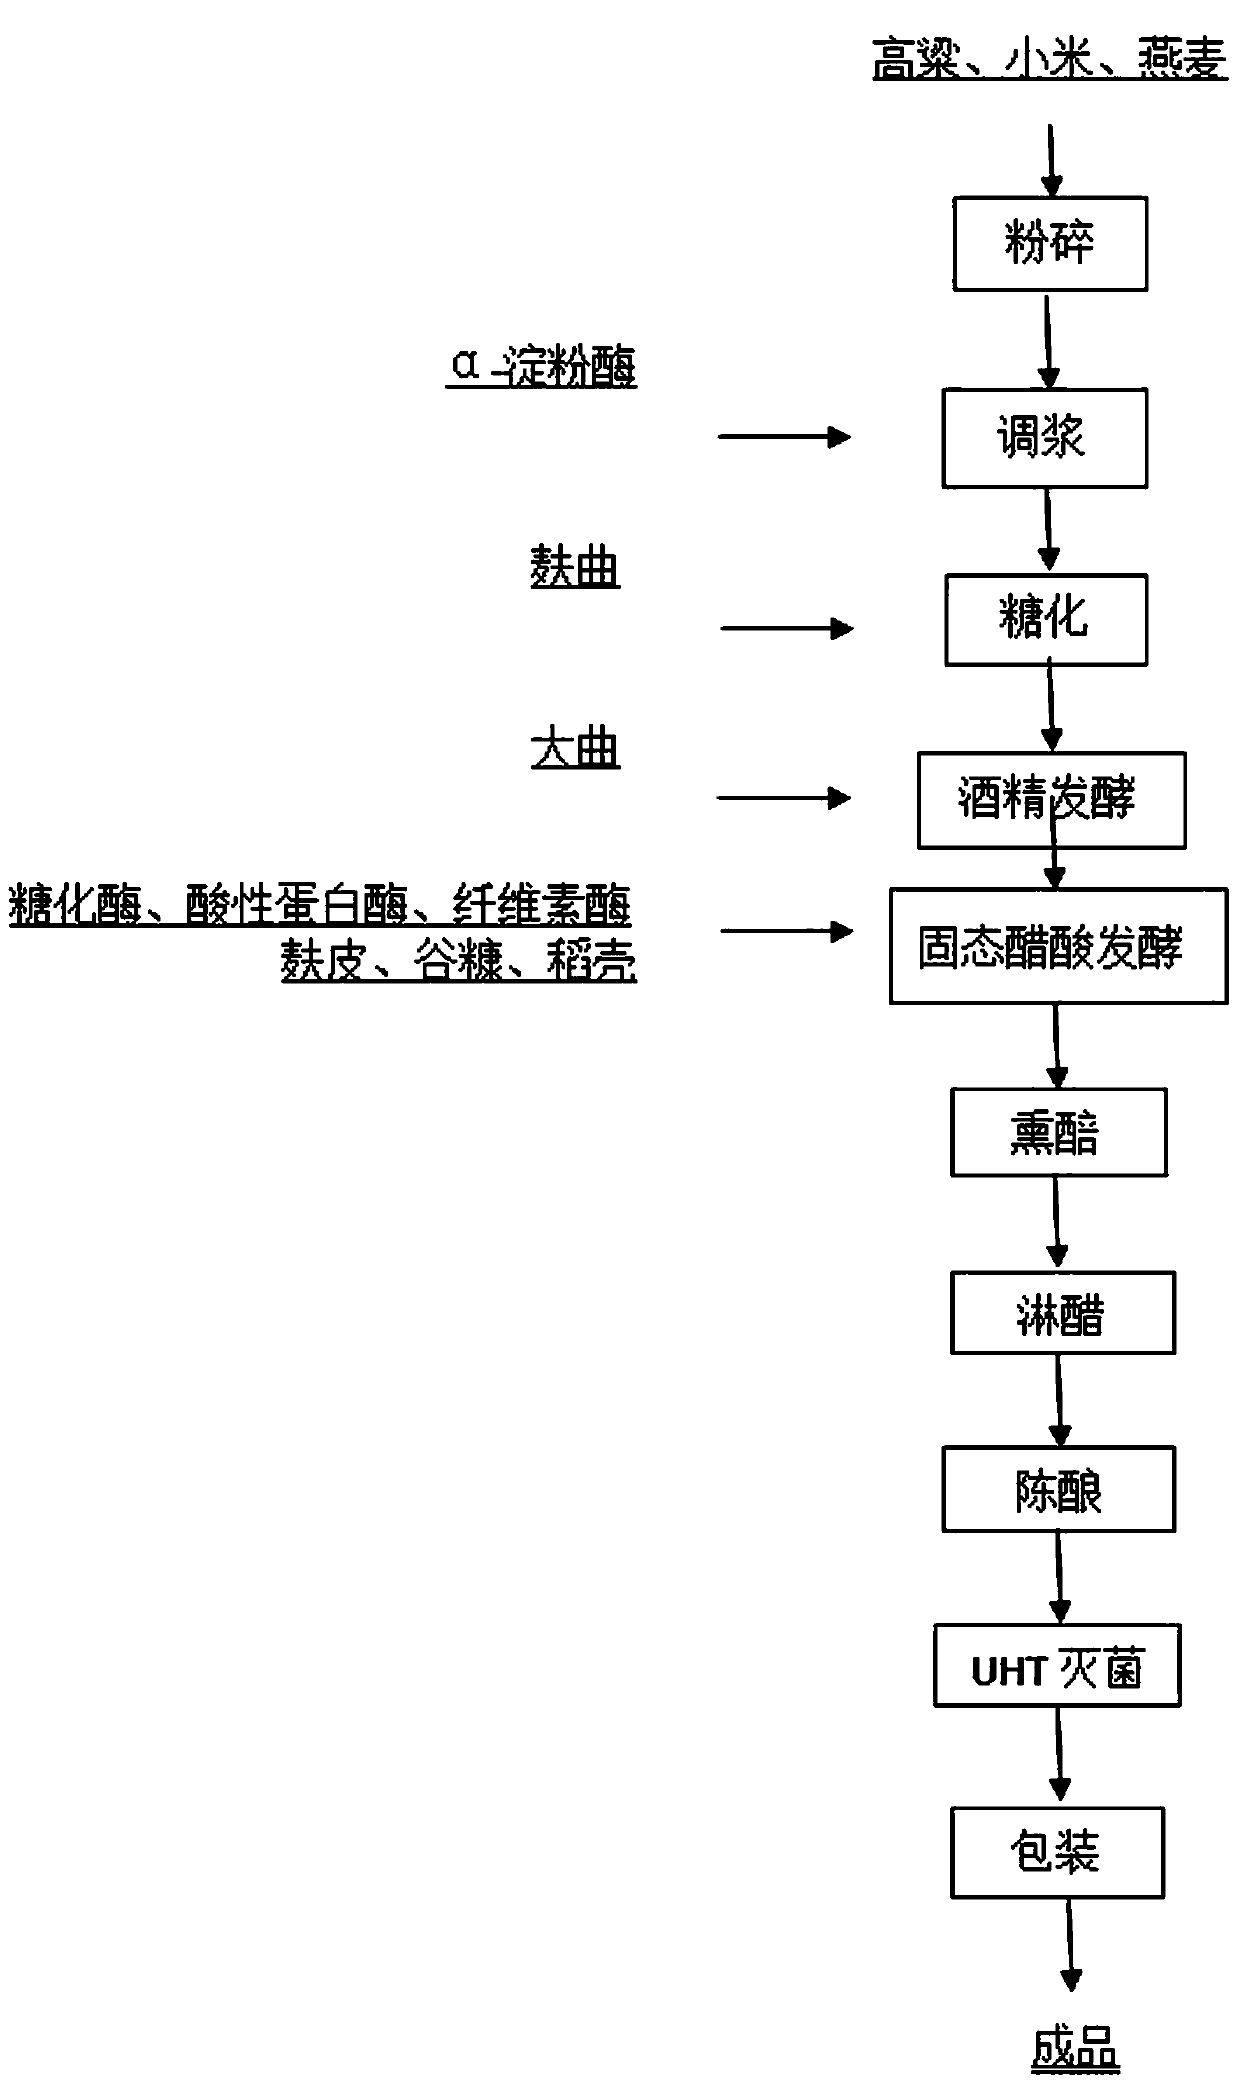 Application method of various enzyme preparations in solid-state acetic acid fermentation of whole grain aged vinegar